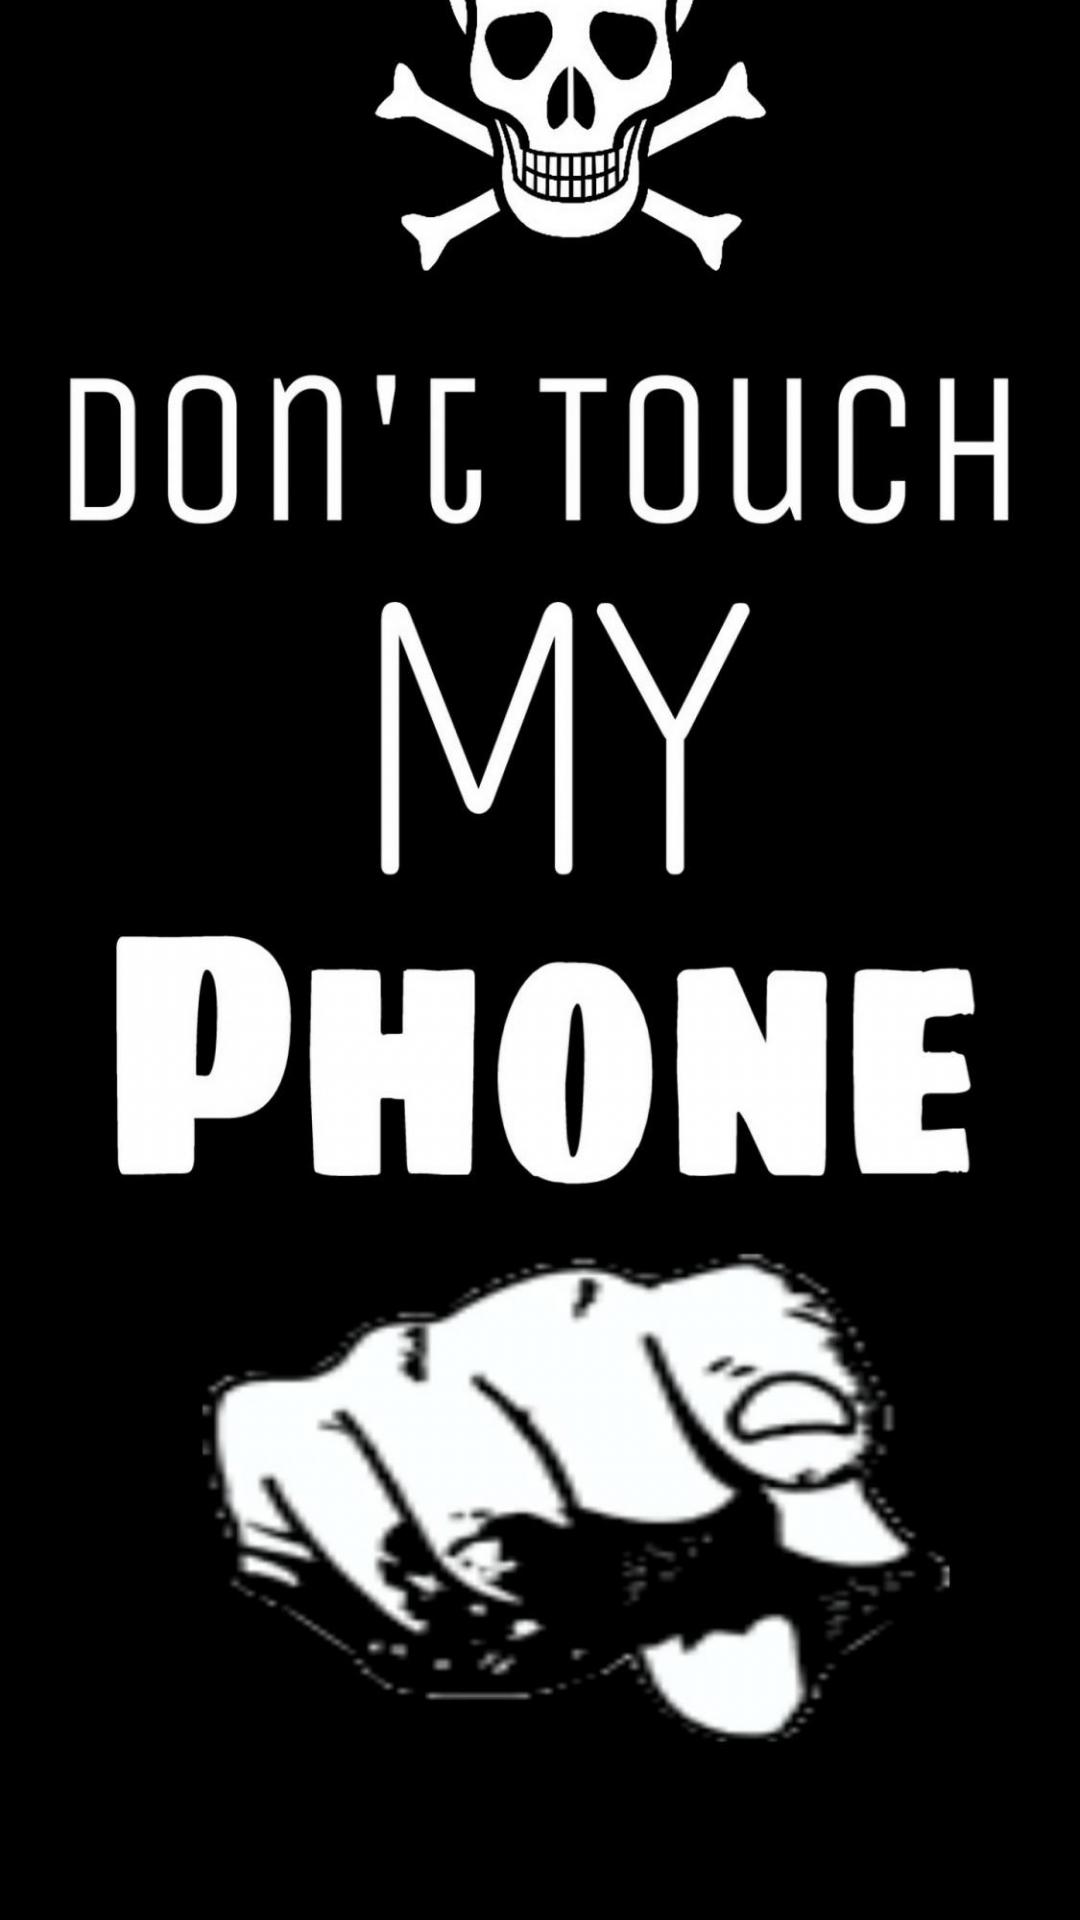 Free download 83 Dont Touch Wallpaper